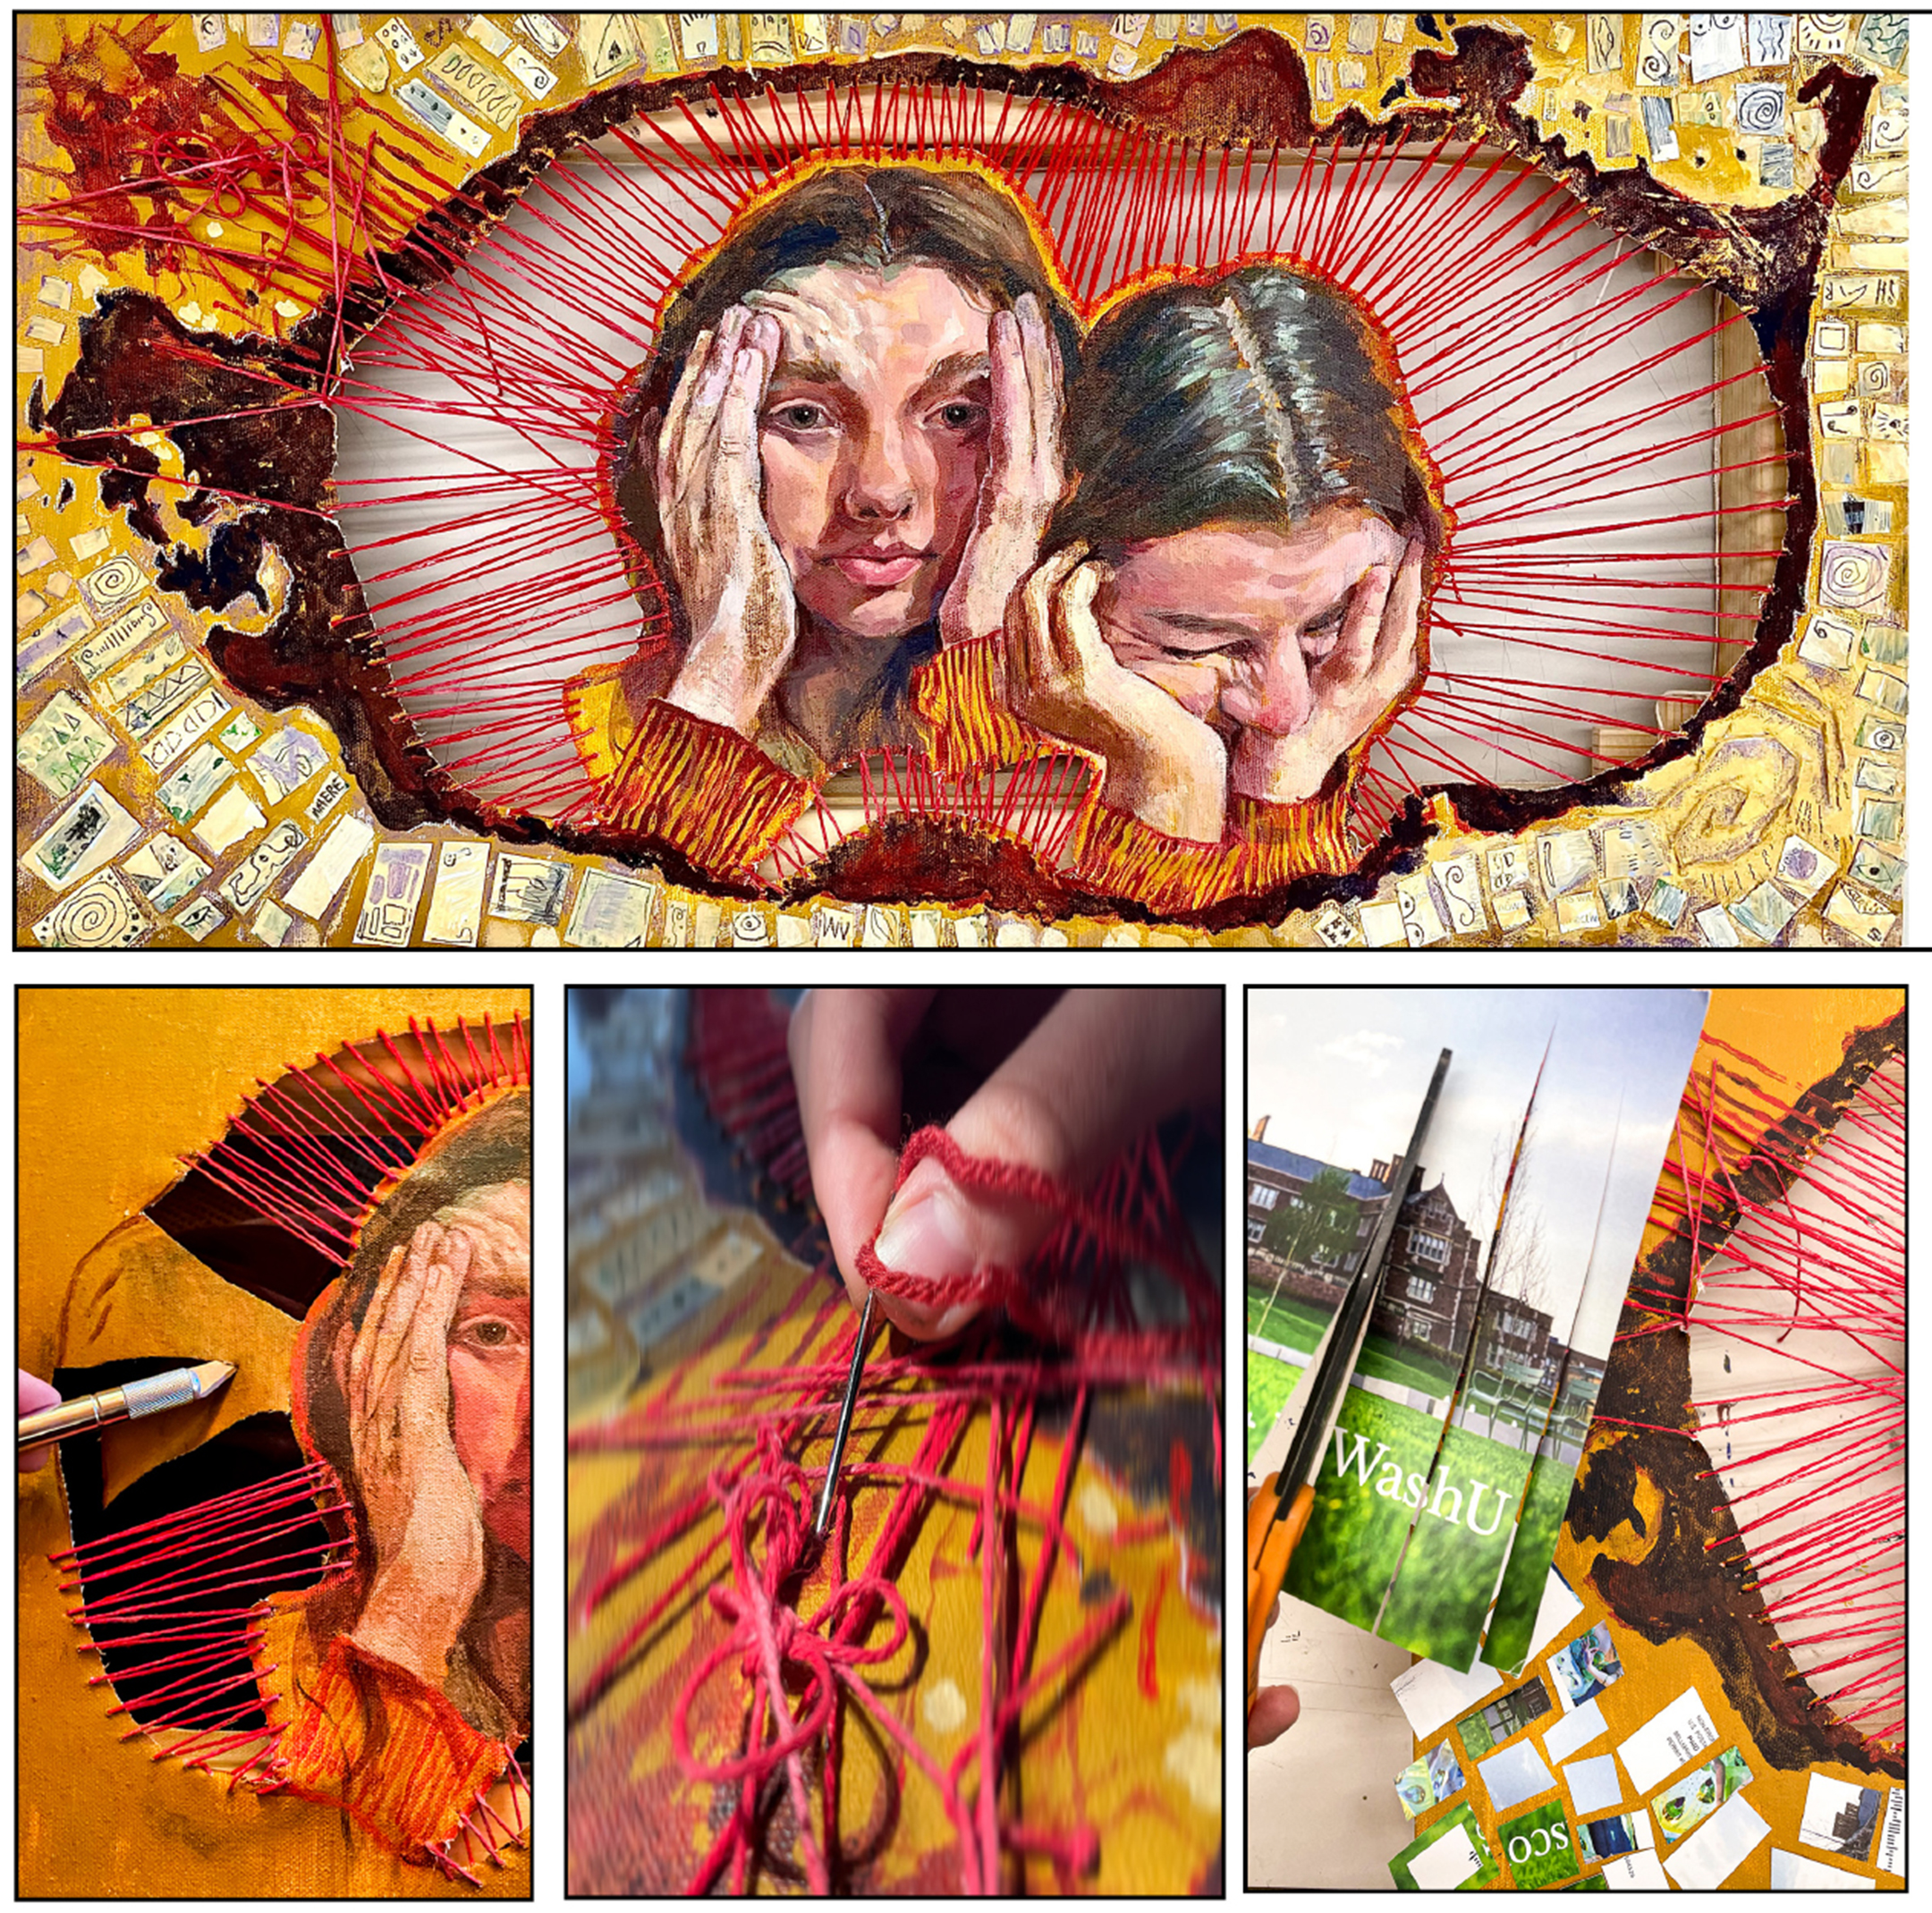 Mixed-media collage of two views of a young woman holding her head surrounded by lines of red string, on the top, and three process images of the collage on the bottom